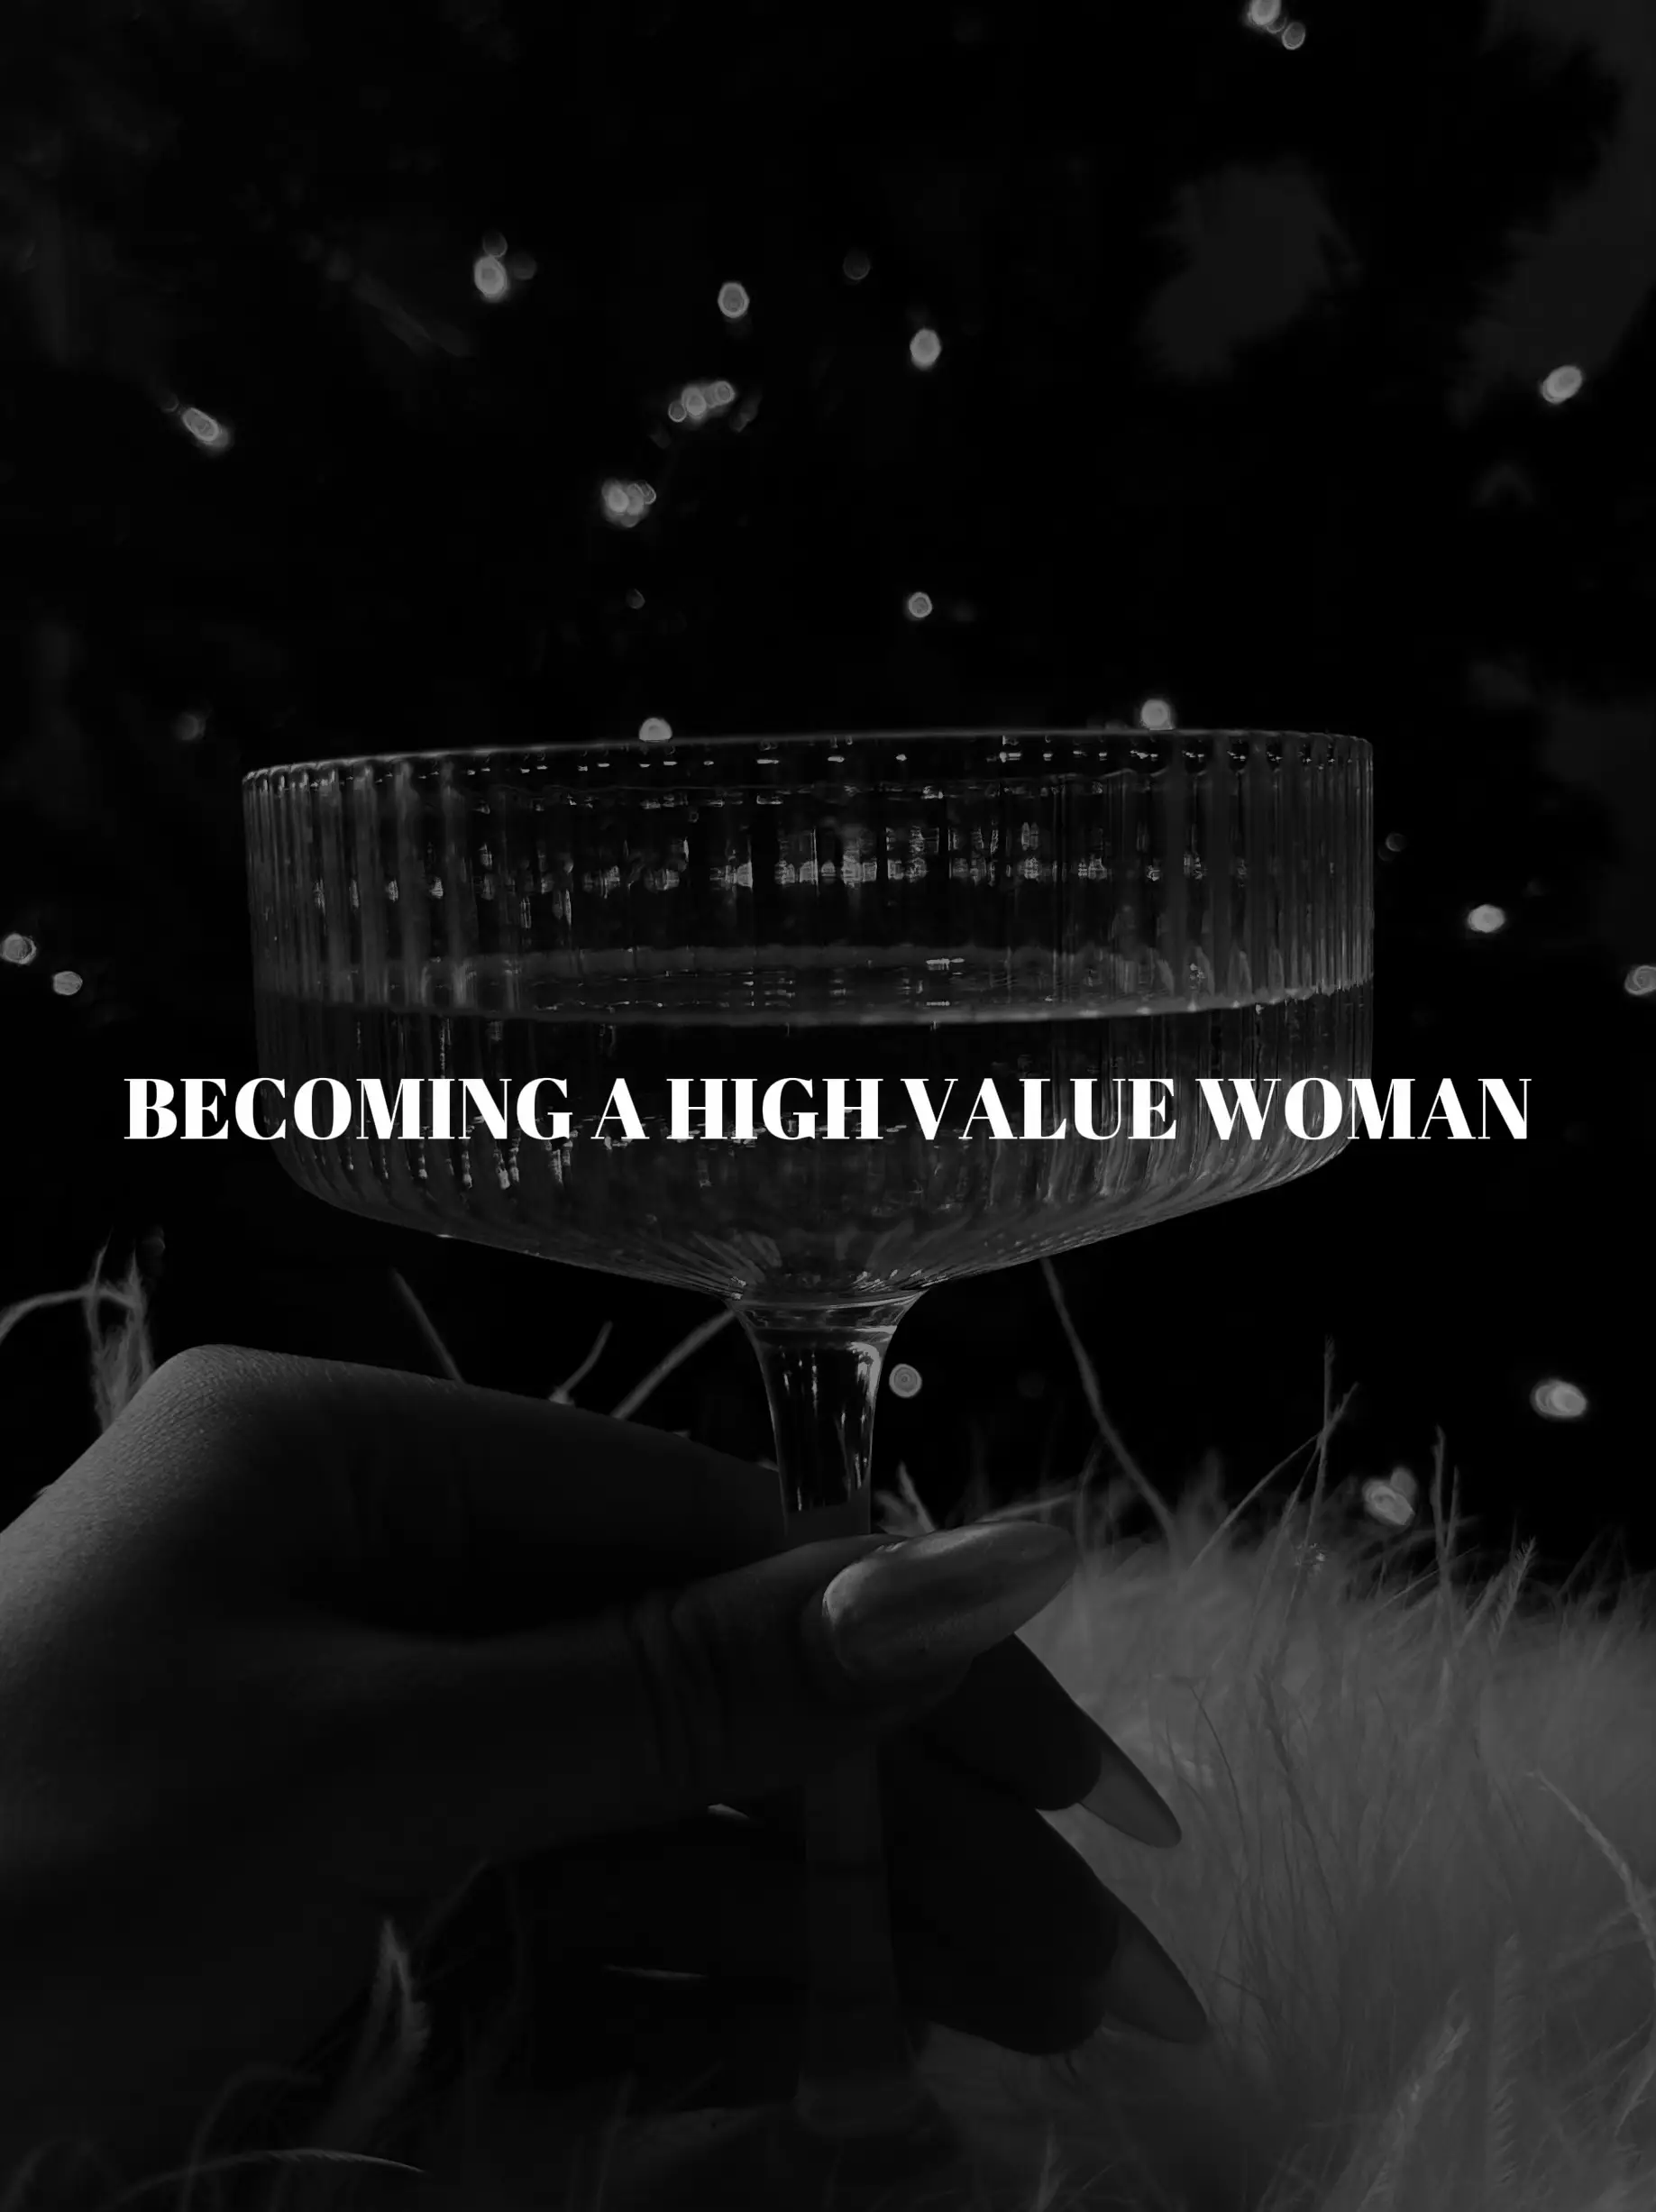 BECOMING A HIGH VALUE WOMAN's images